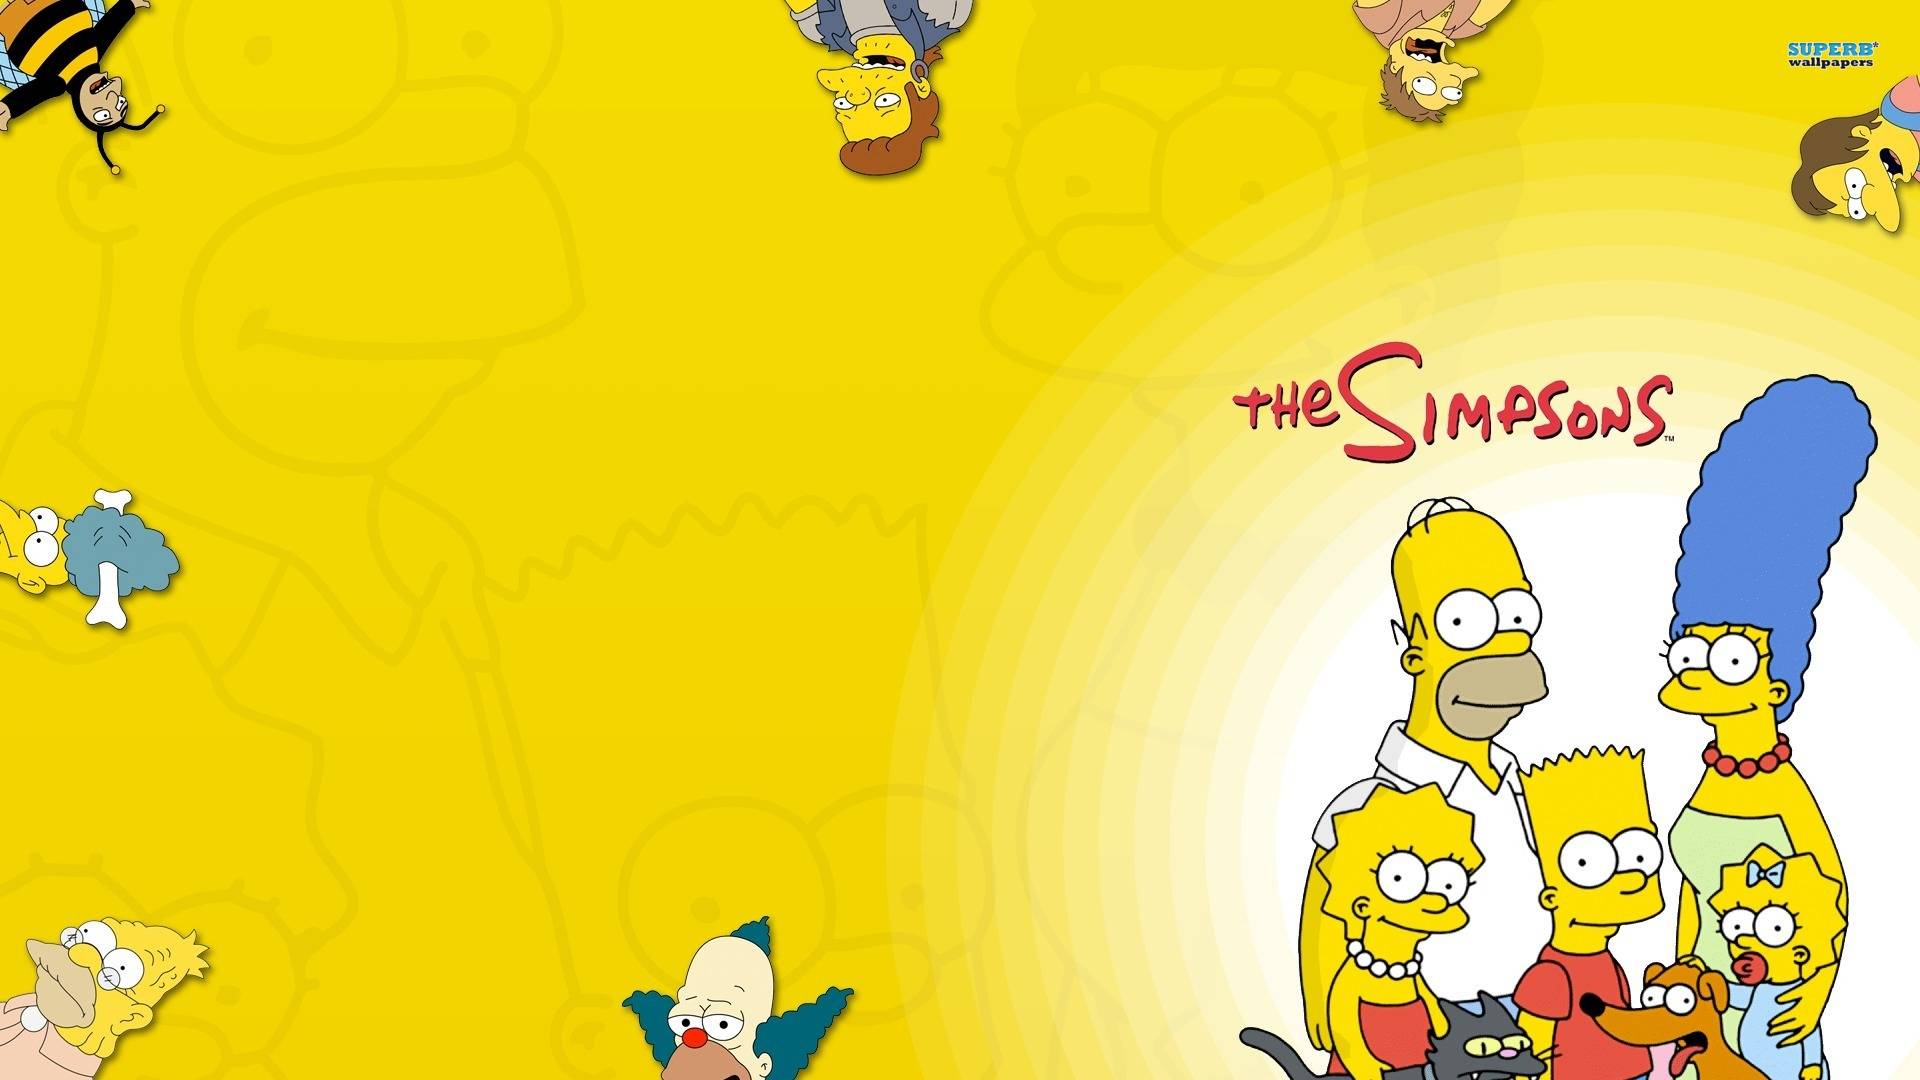 The Simpsons   The Simpsons Wallpaper 1920x1080